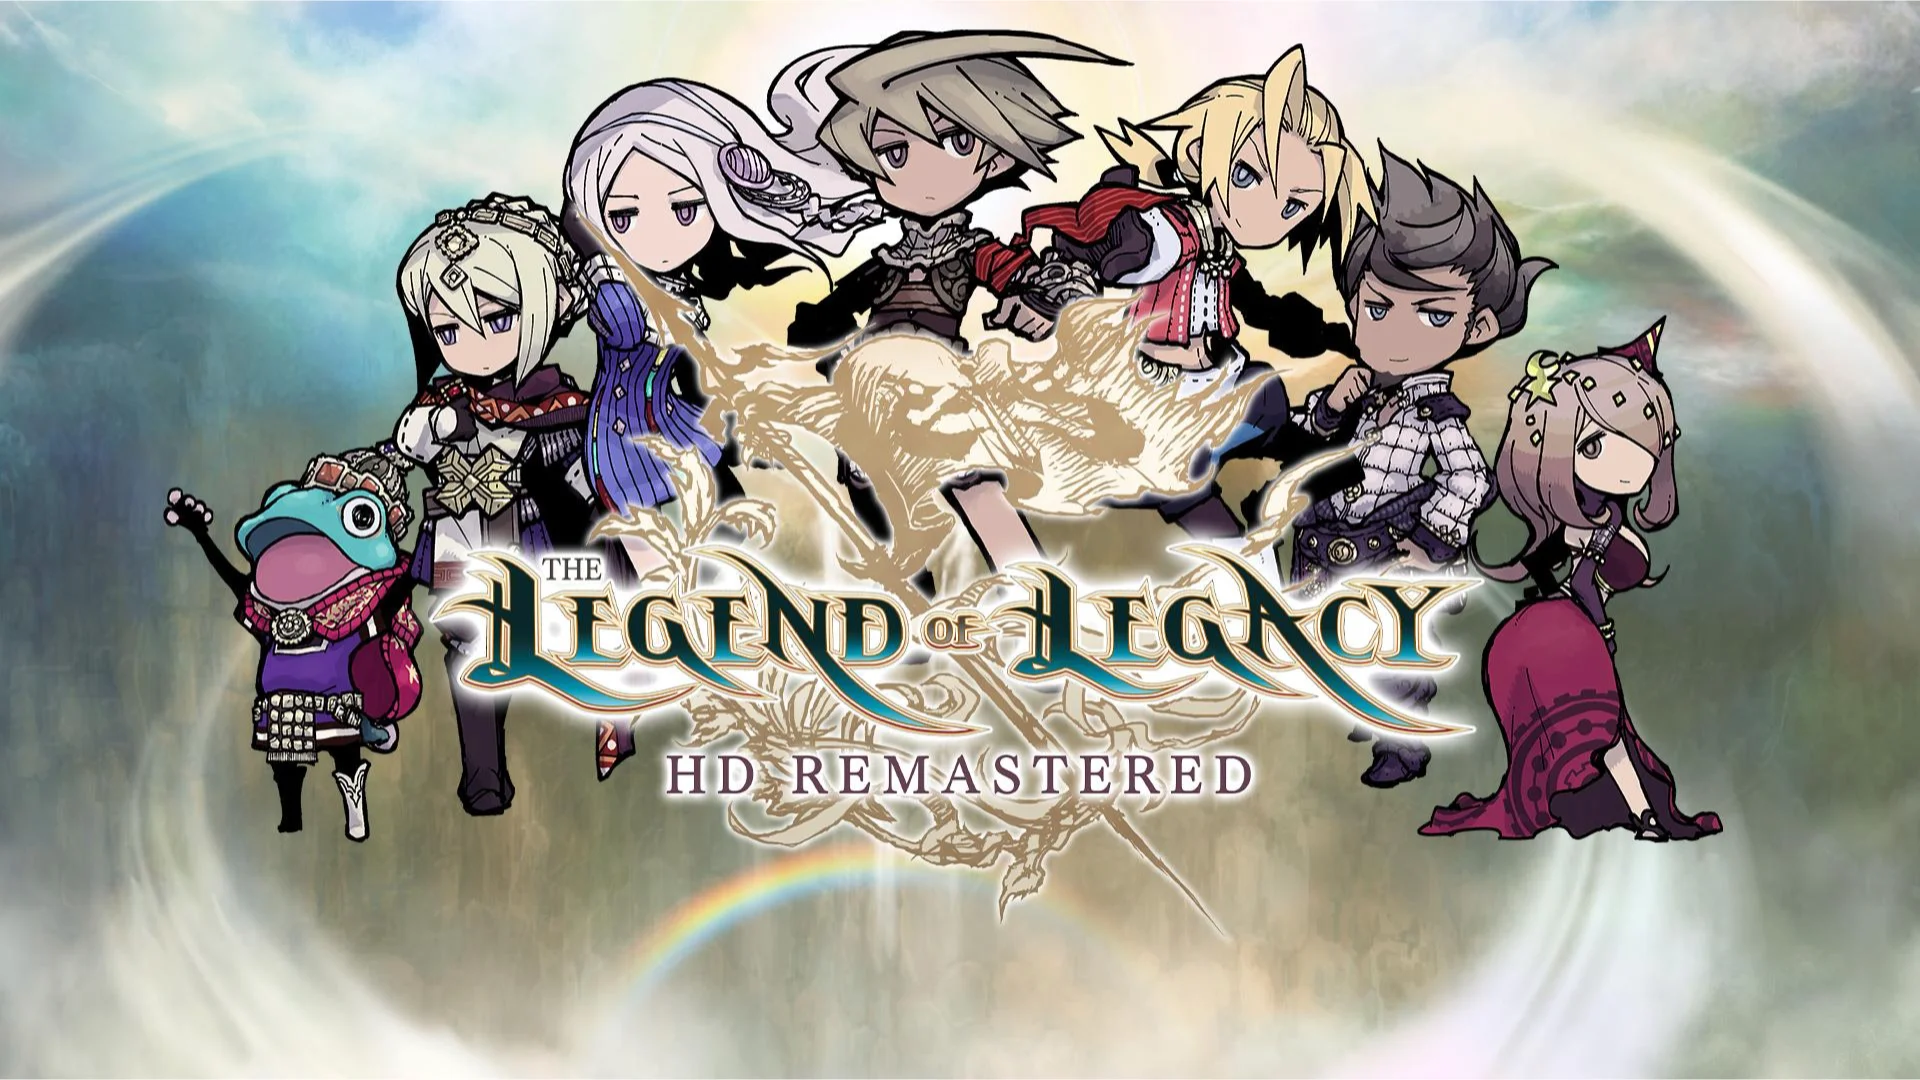 The Legend of Legacy HD Remastered Artwork 001